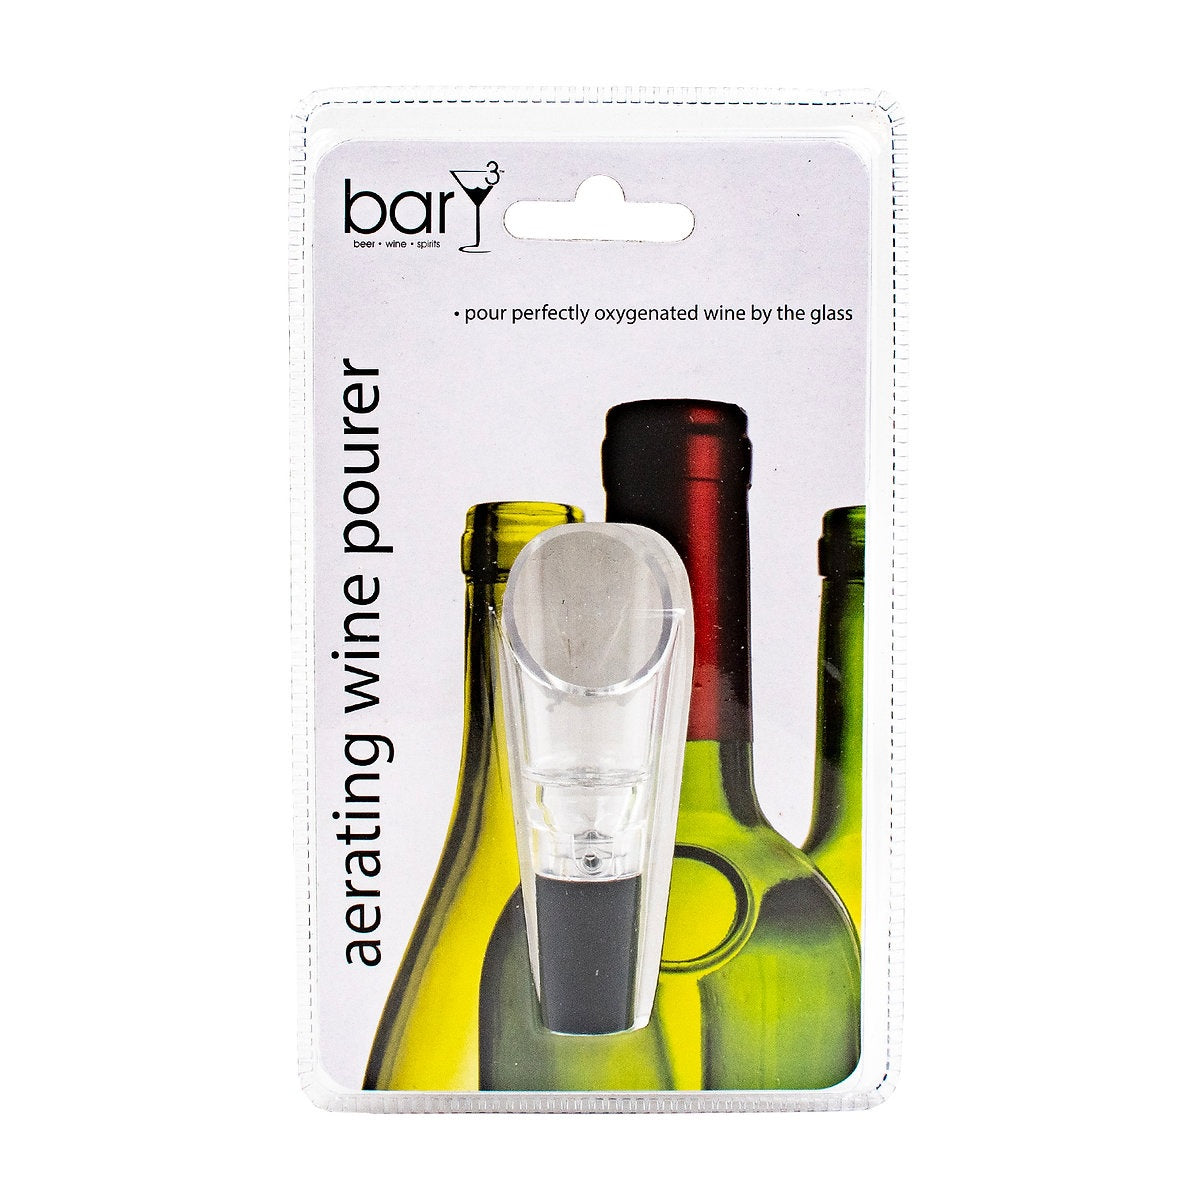 BarY3 BAR-0754 Aerating Wine Pourer, Black/Clear